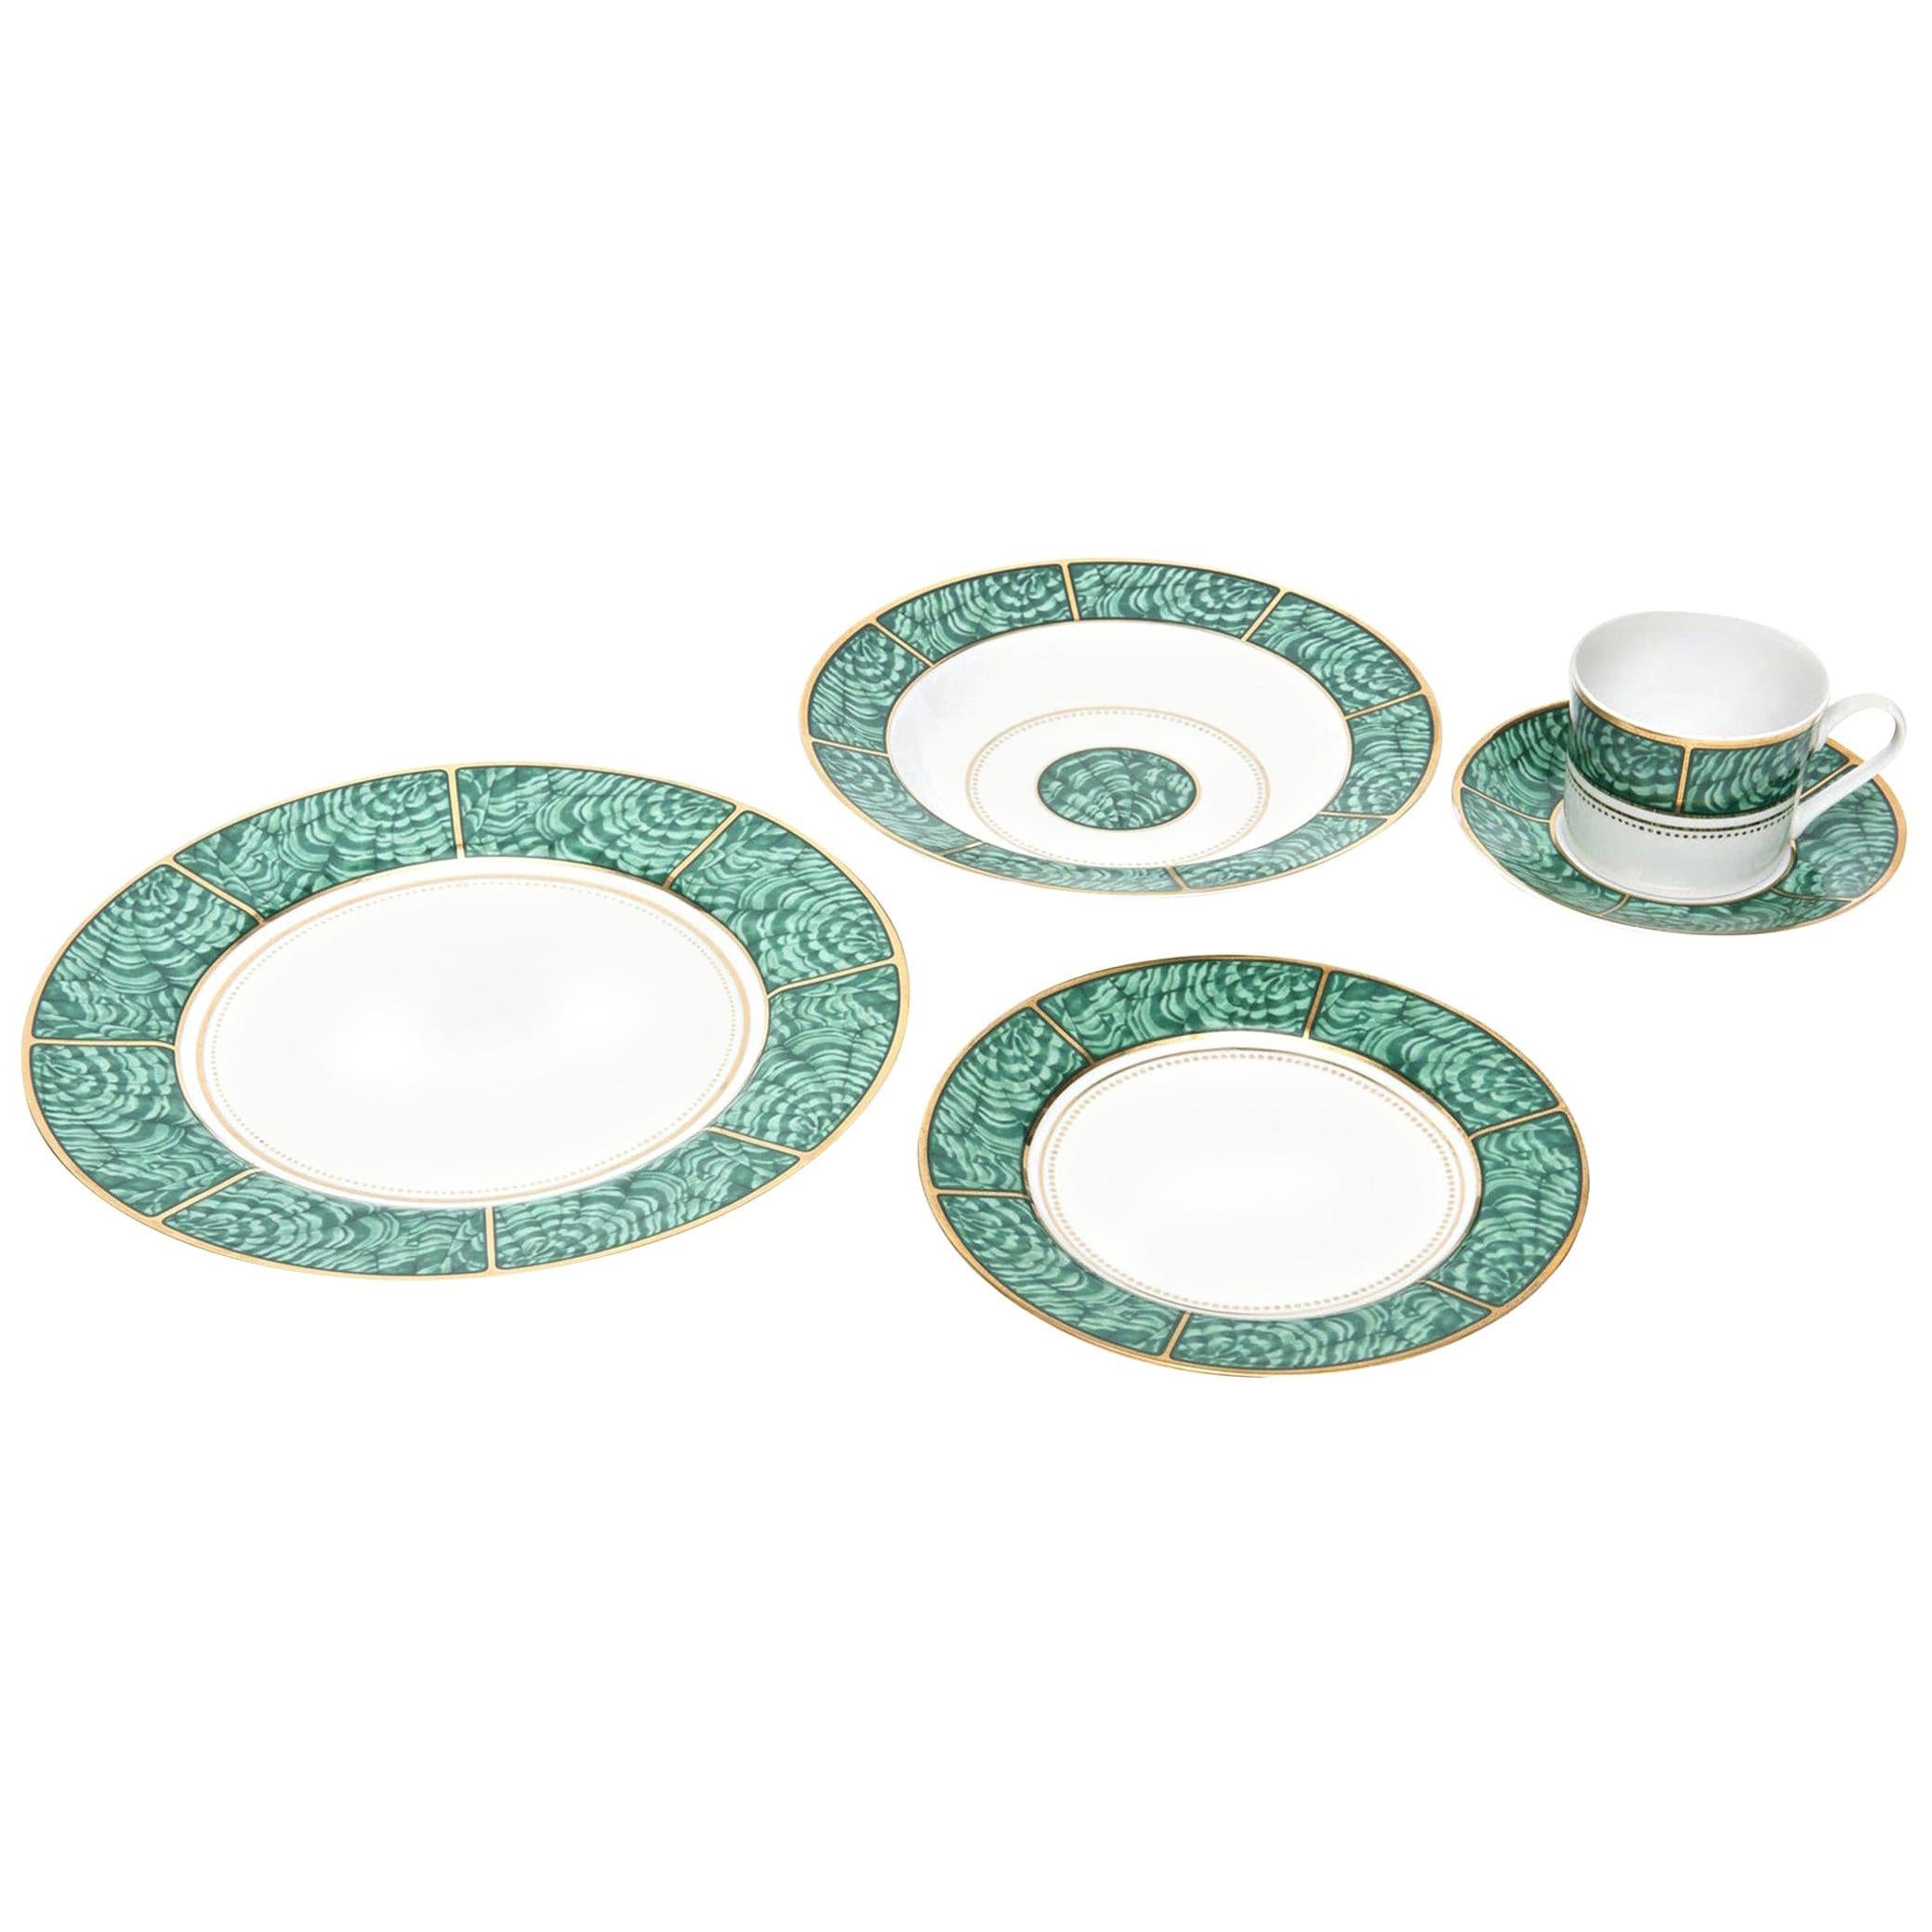 Georges Briard Imperial Malachite Porcelain China Service for Four Vintage